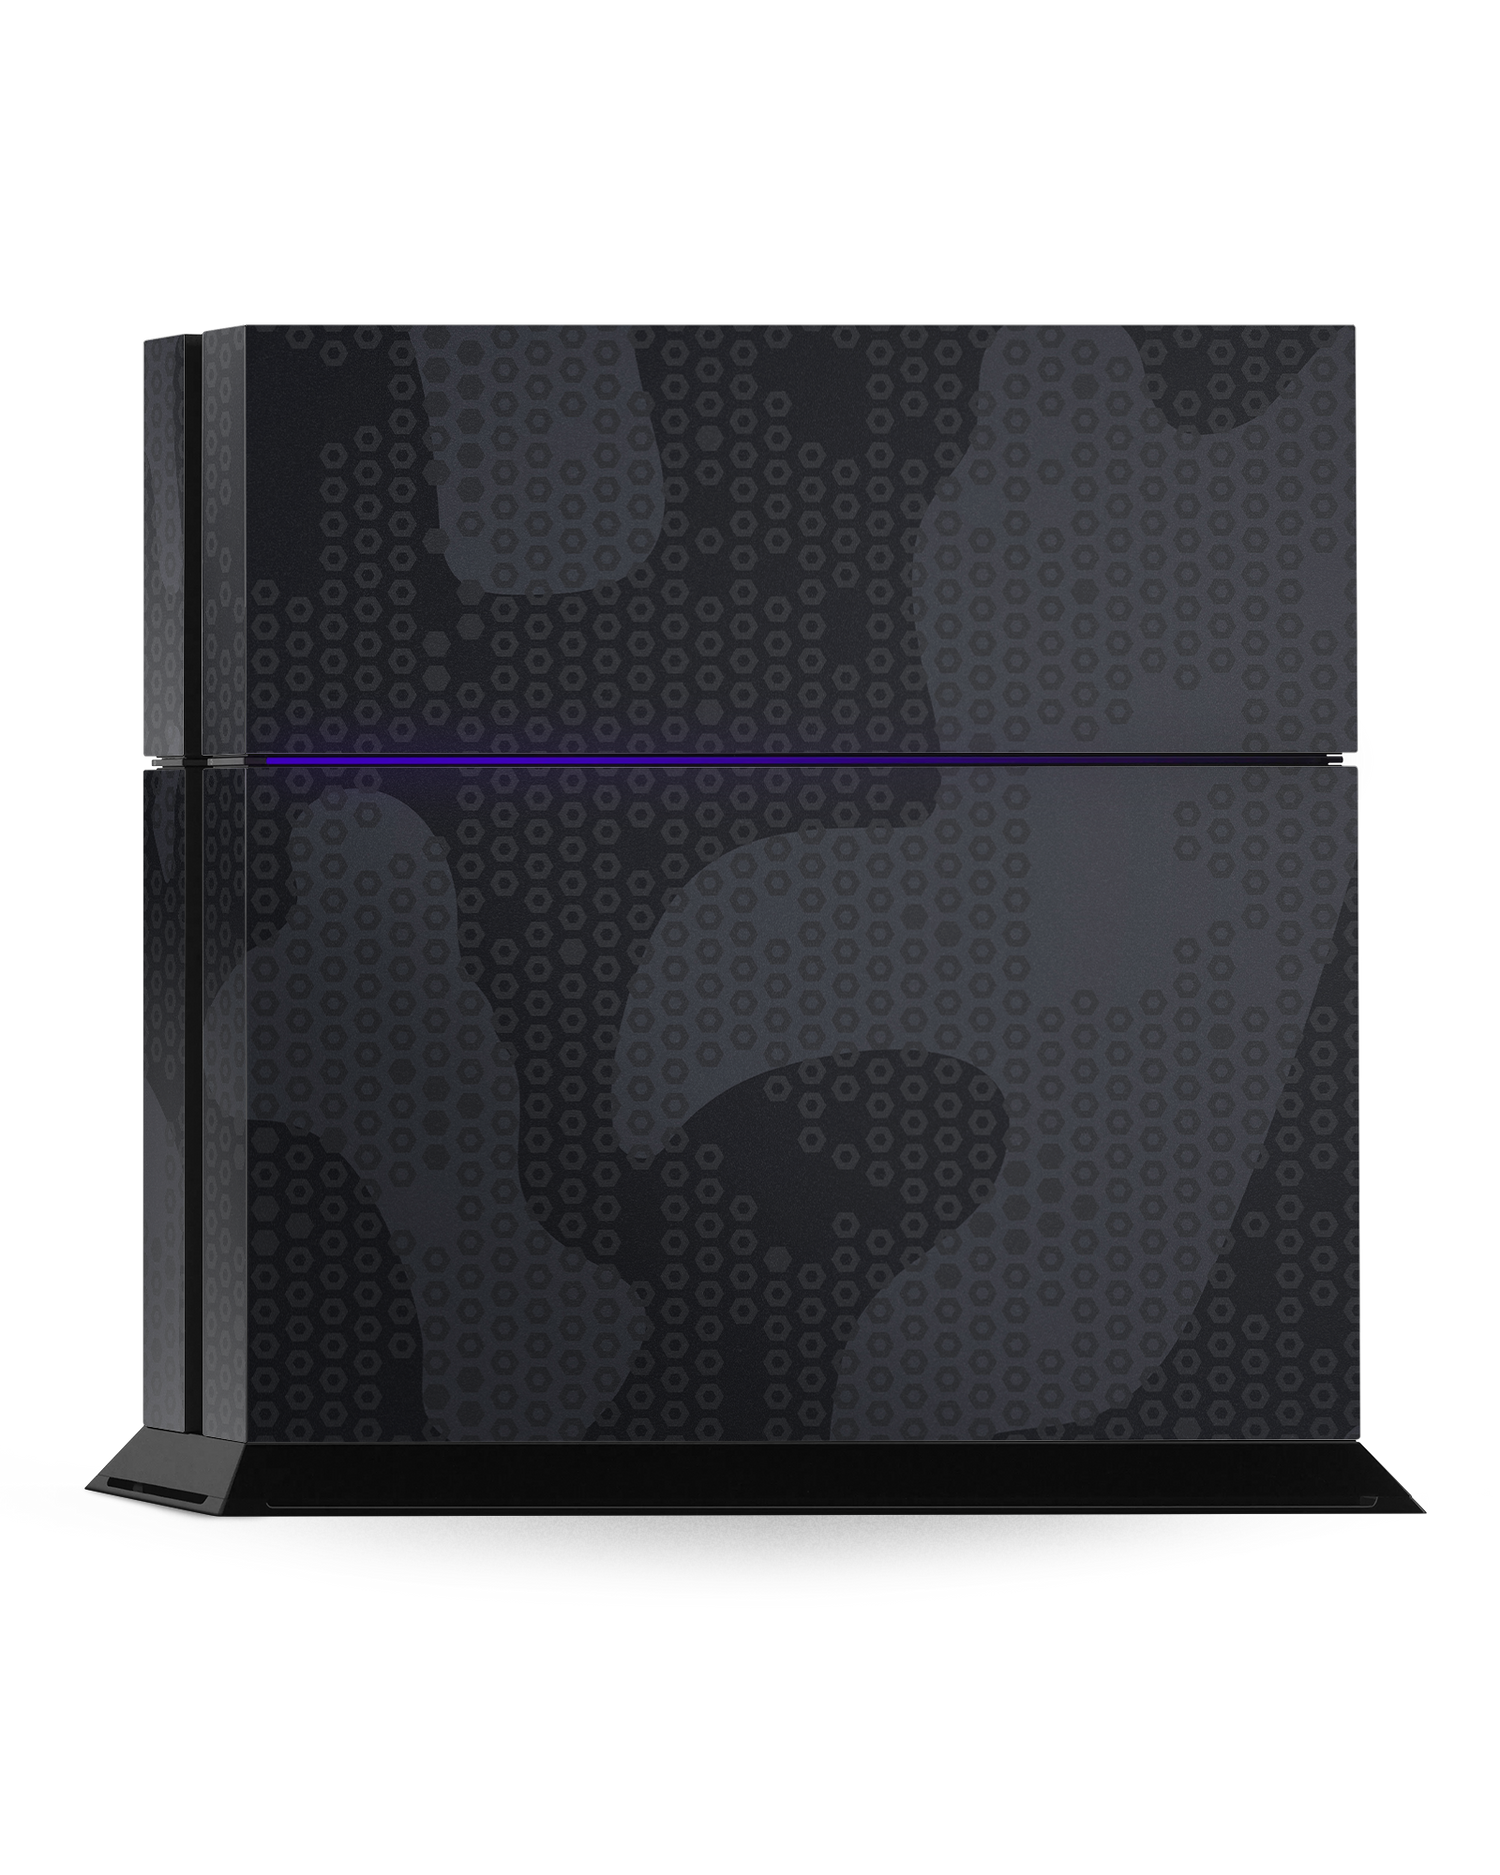 Spec Ops Dark Console Skin for Sony PlayStation 4: Standing